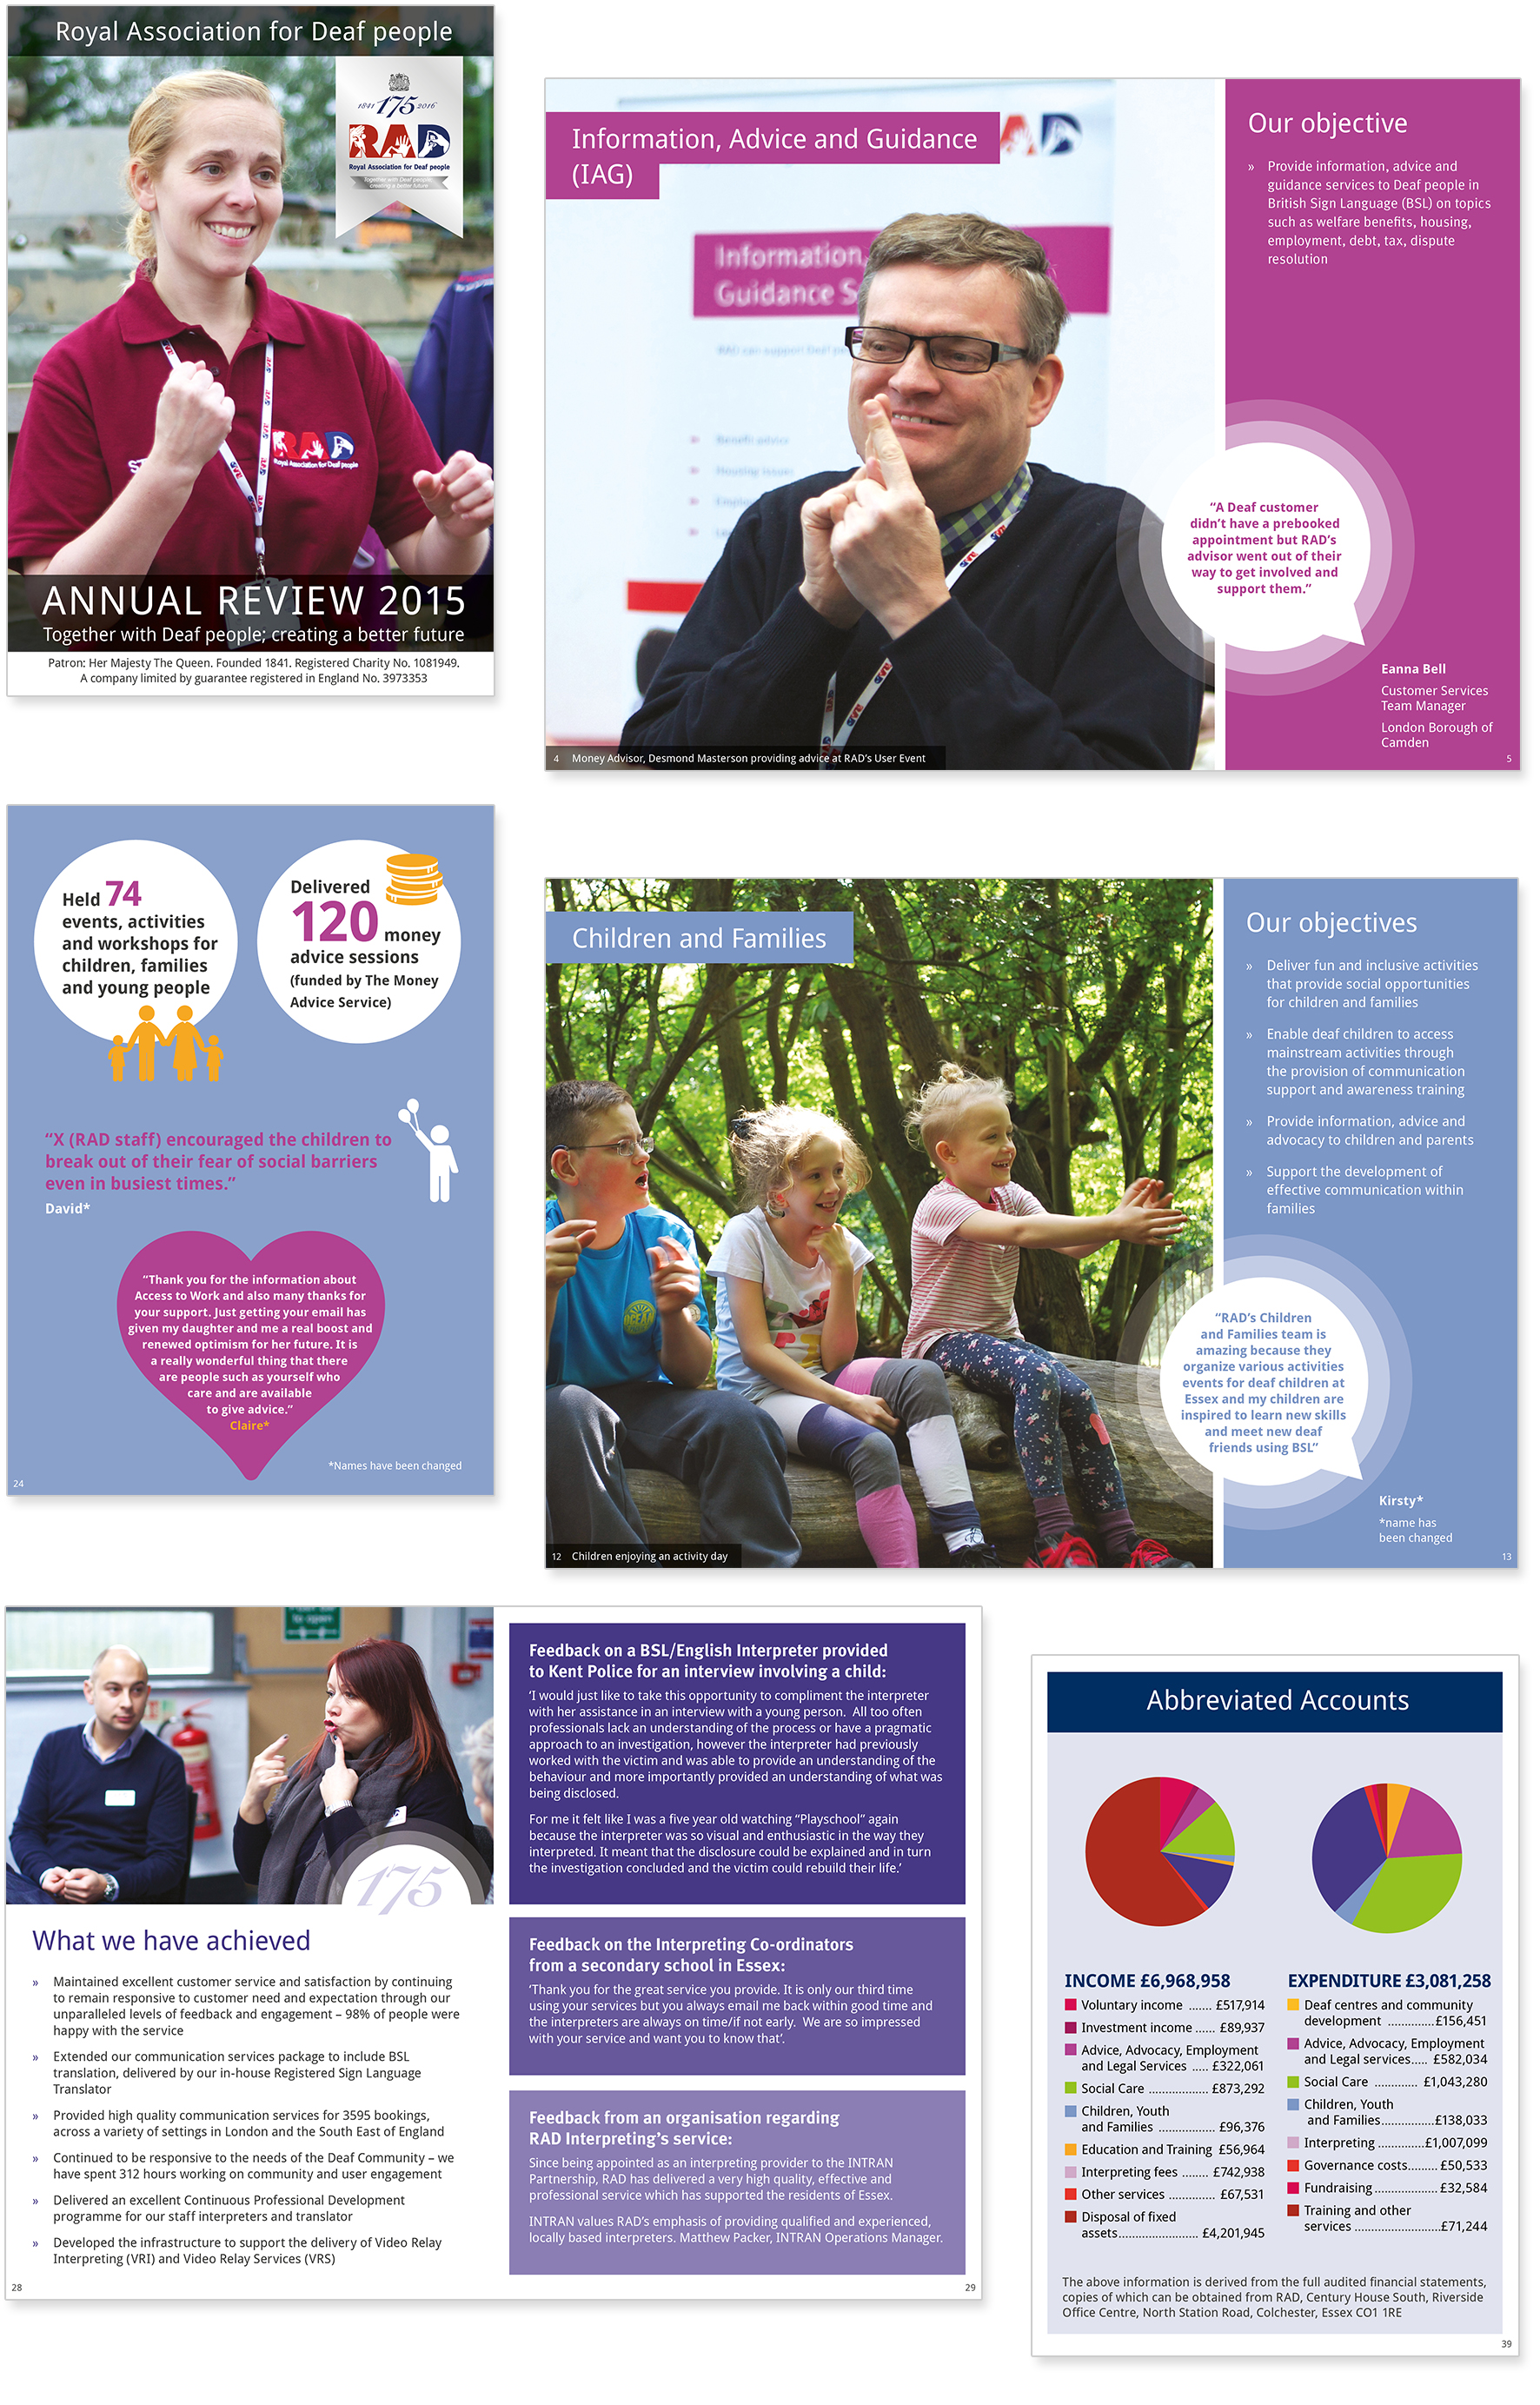 Sample pages from Annual Review for Royal Association for Deaf People.